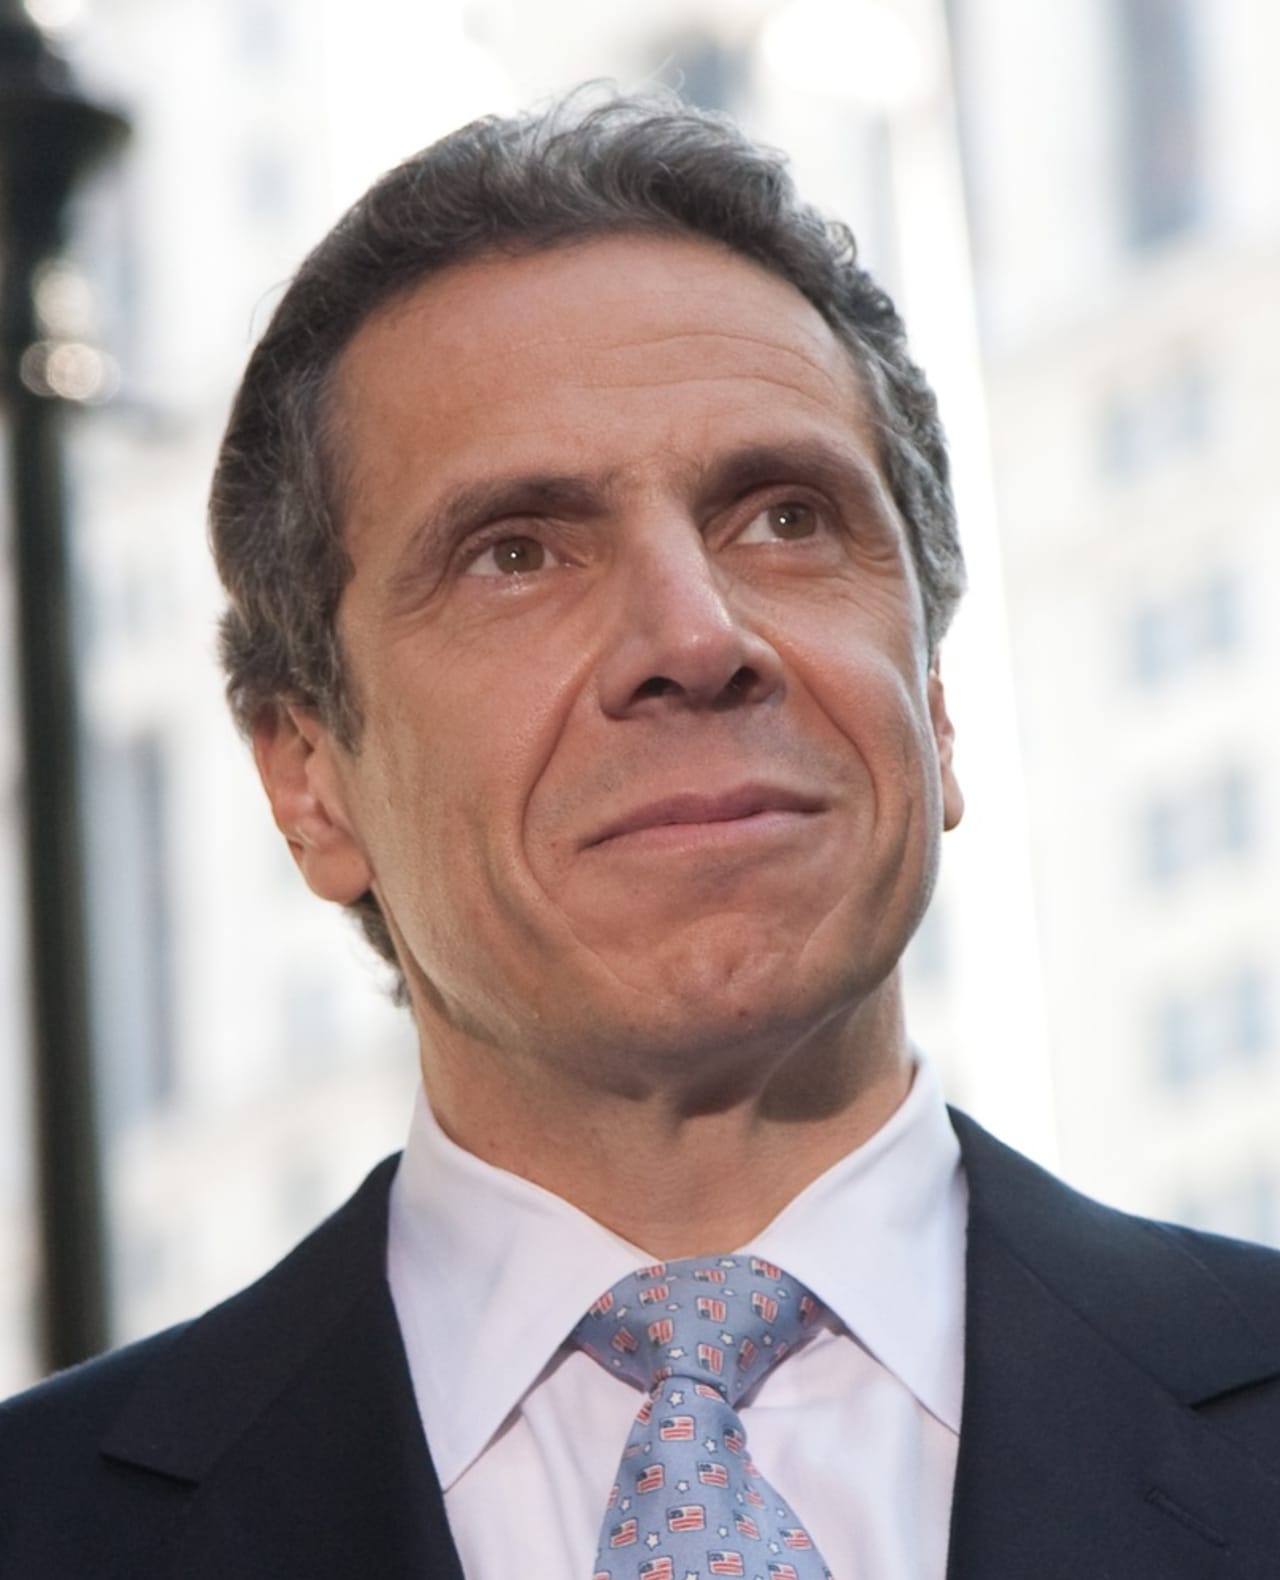 Downstate DAs are coming after New York Gov. Andrew Cuomo.